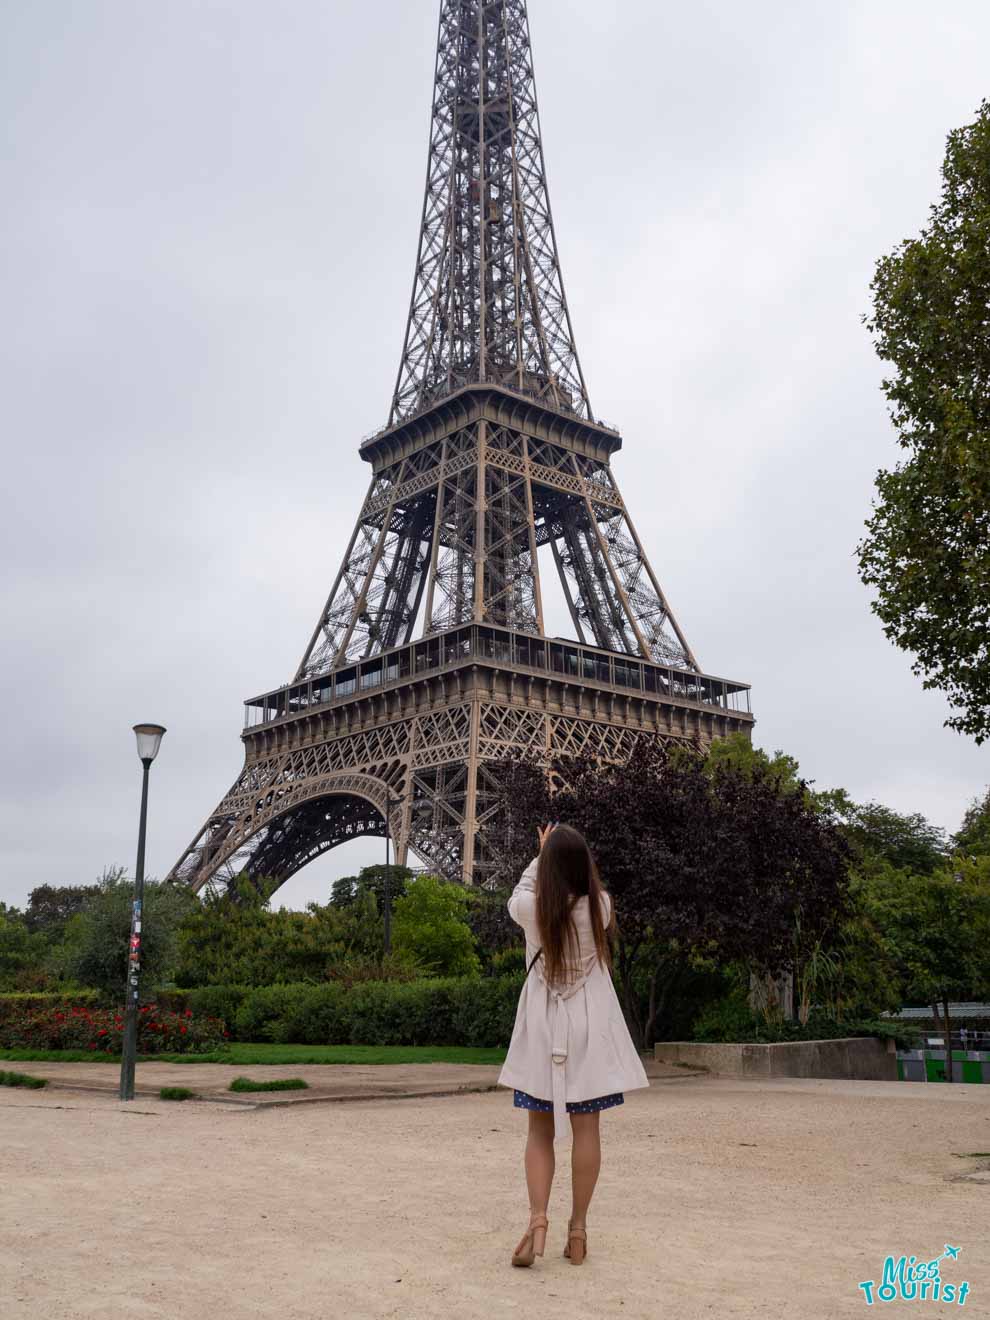 Eiffel Tower Visit Done Right: Book Tickets Ahead or Even Skip the Line!